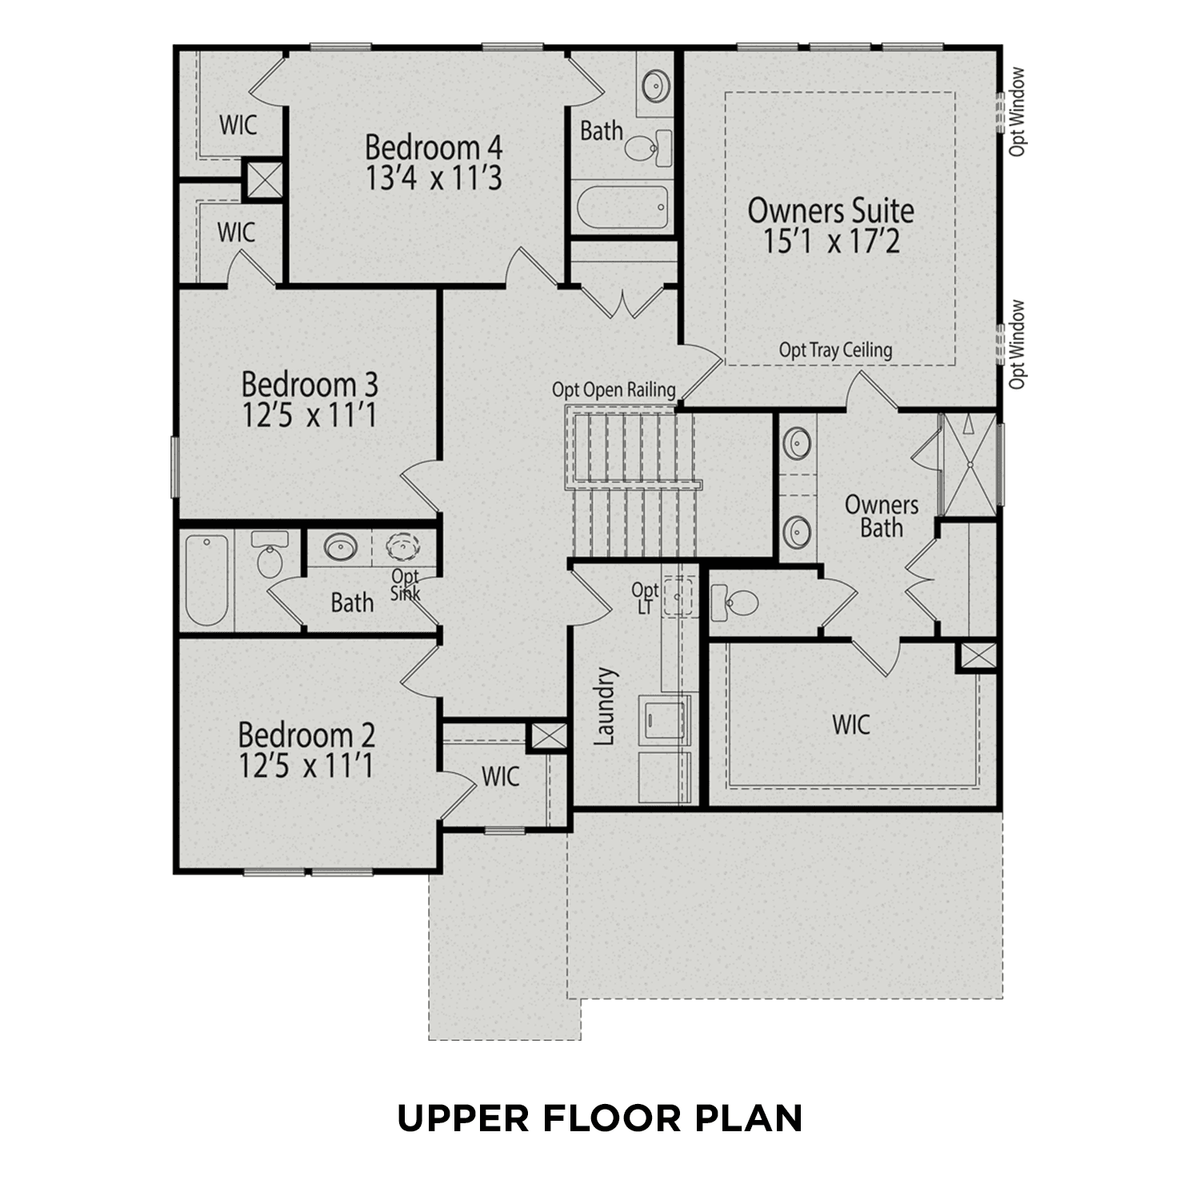 2 - The Hickory D floor plan layout for 123 Golden Leaf Farms Road in Davidson Homes' Tobacco Road community.